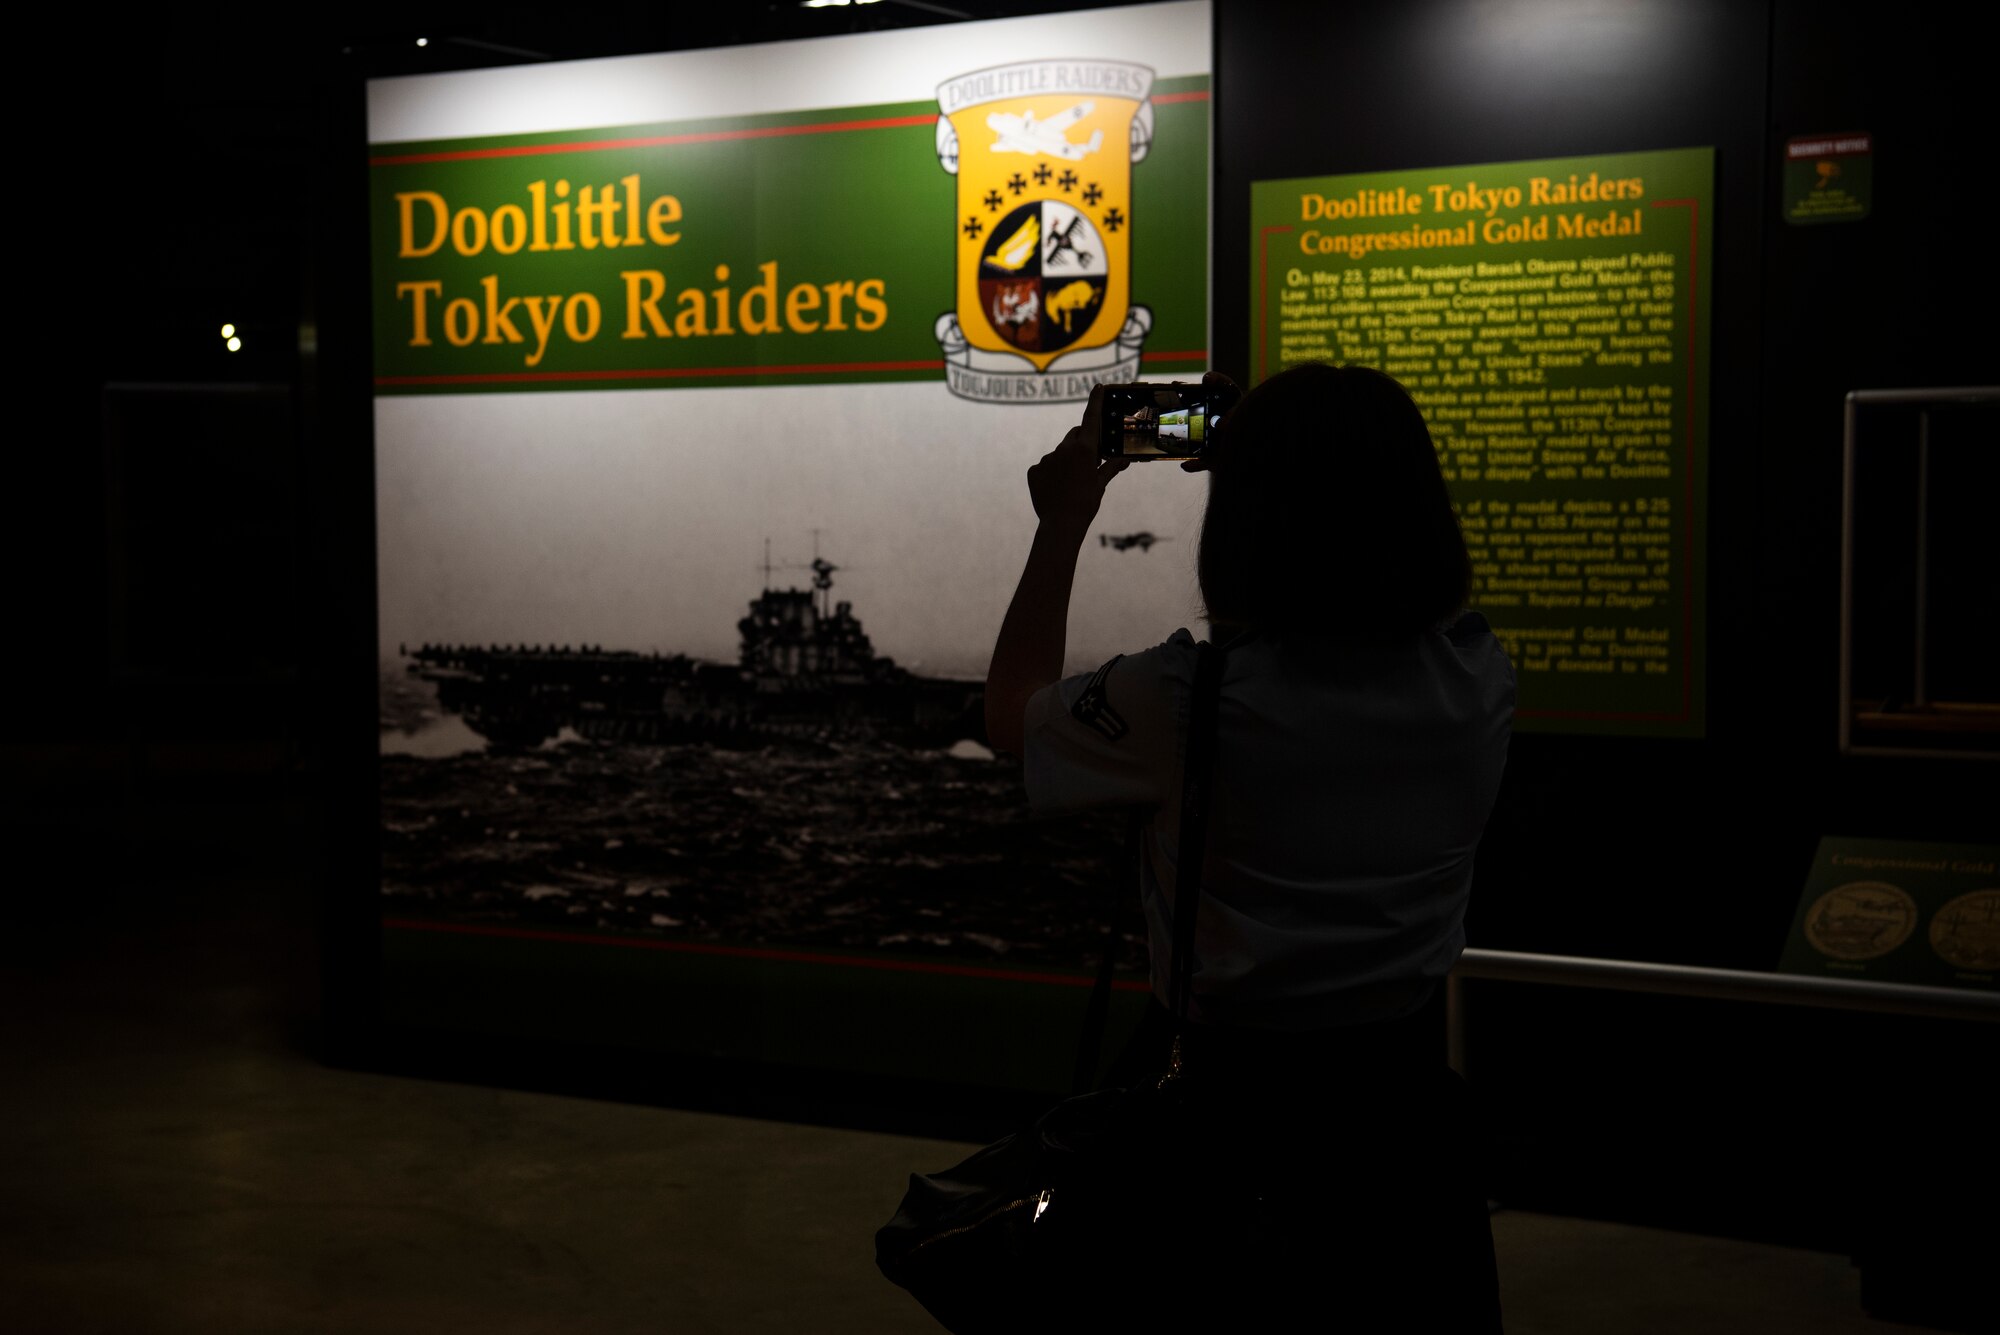 Airman 1st Class Brittany Parsons, 90th Comptroller Squadron financial operations technician, takes a picture of the Doolittle Raid exhibit in The National Museum of the U.S. Air Force Sept. 4, 2019, at Wright-Patterson Air Force Base, Ohio. The museum is 19 acres of indoor viewing space, making it the worlds largest aviation museum. (U.S. Air Force photo by Senior Airman Abbigayle Williams)